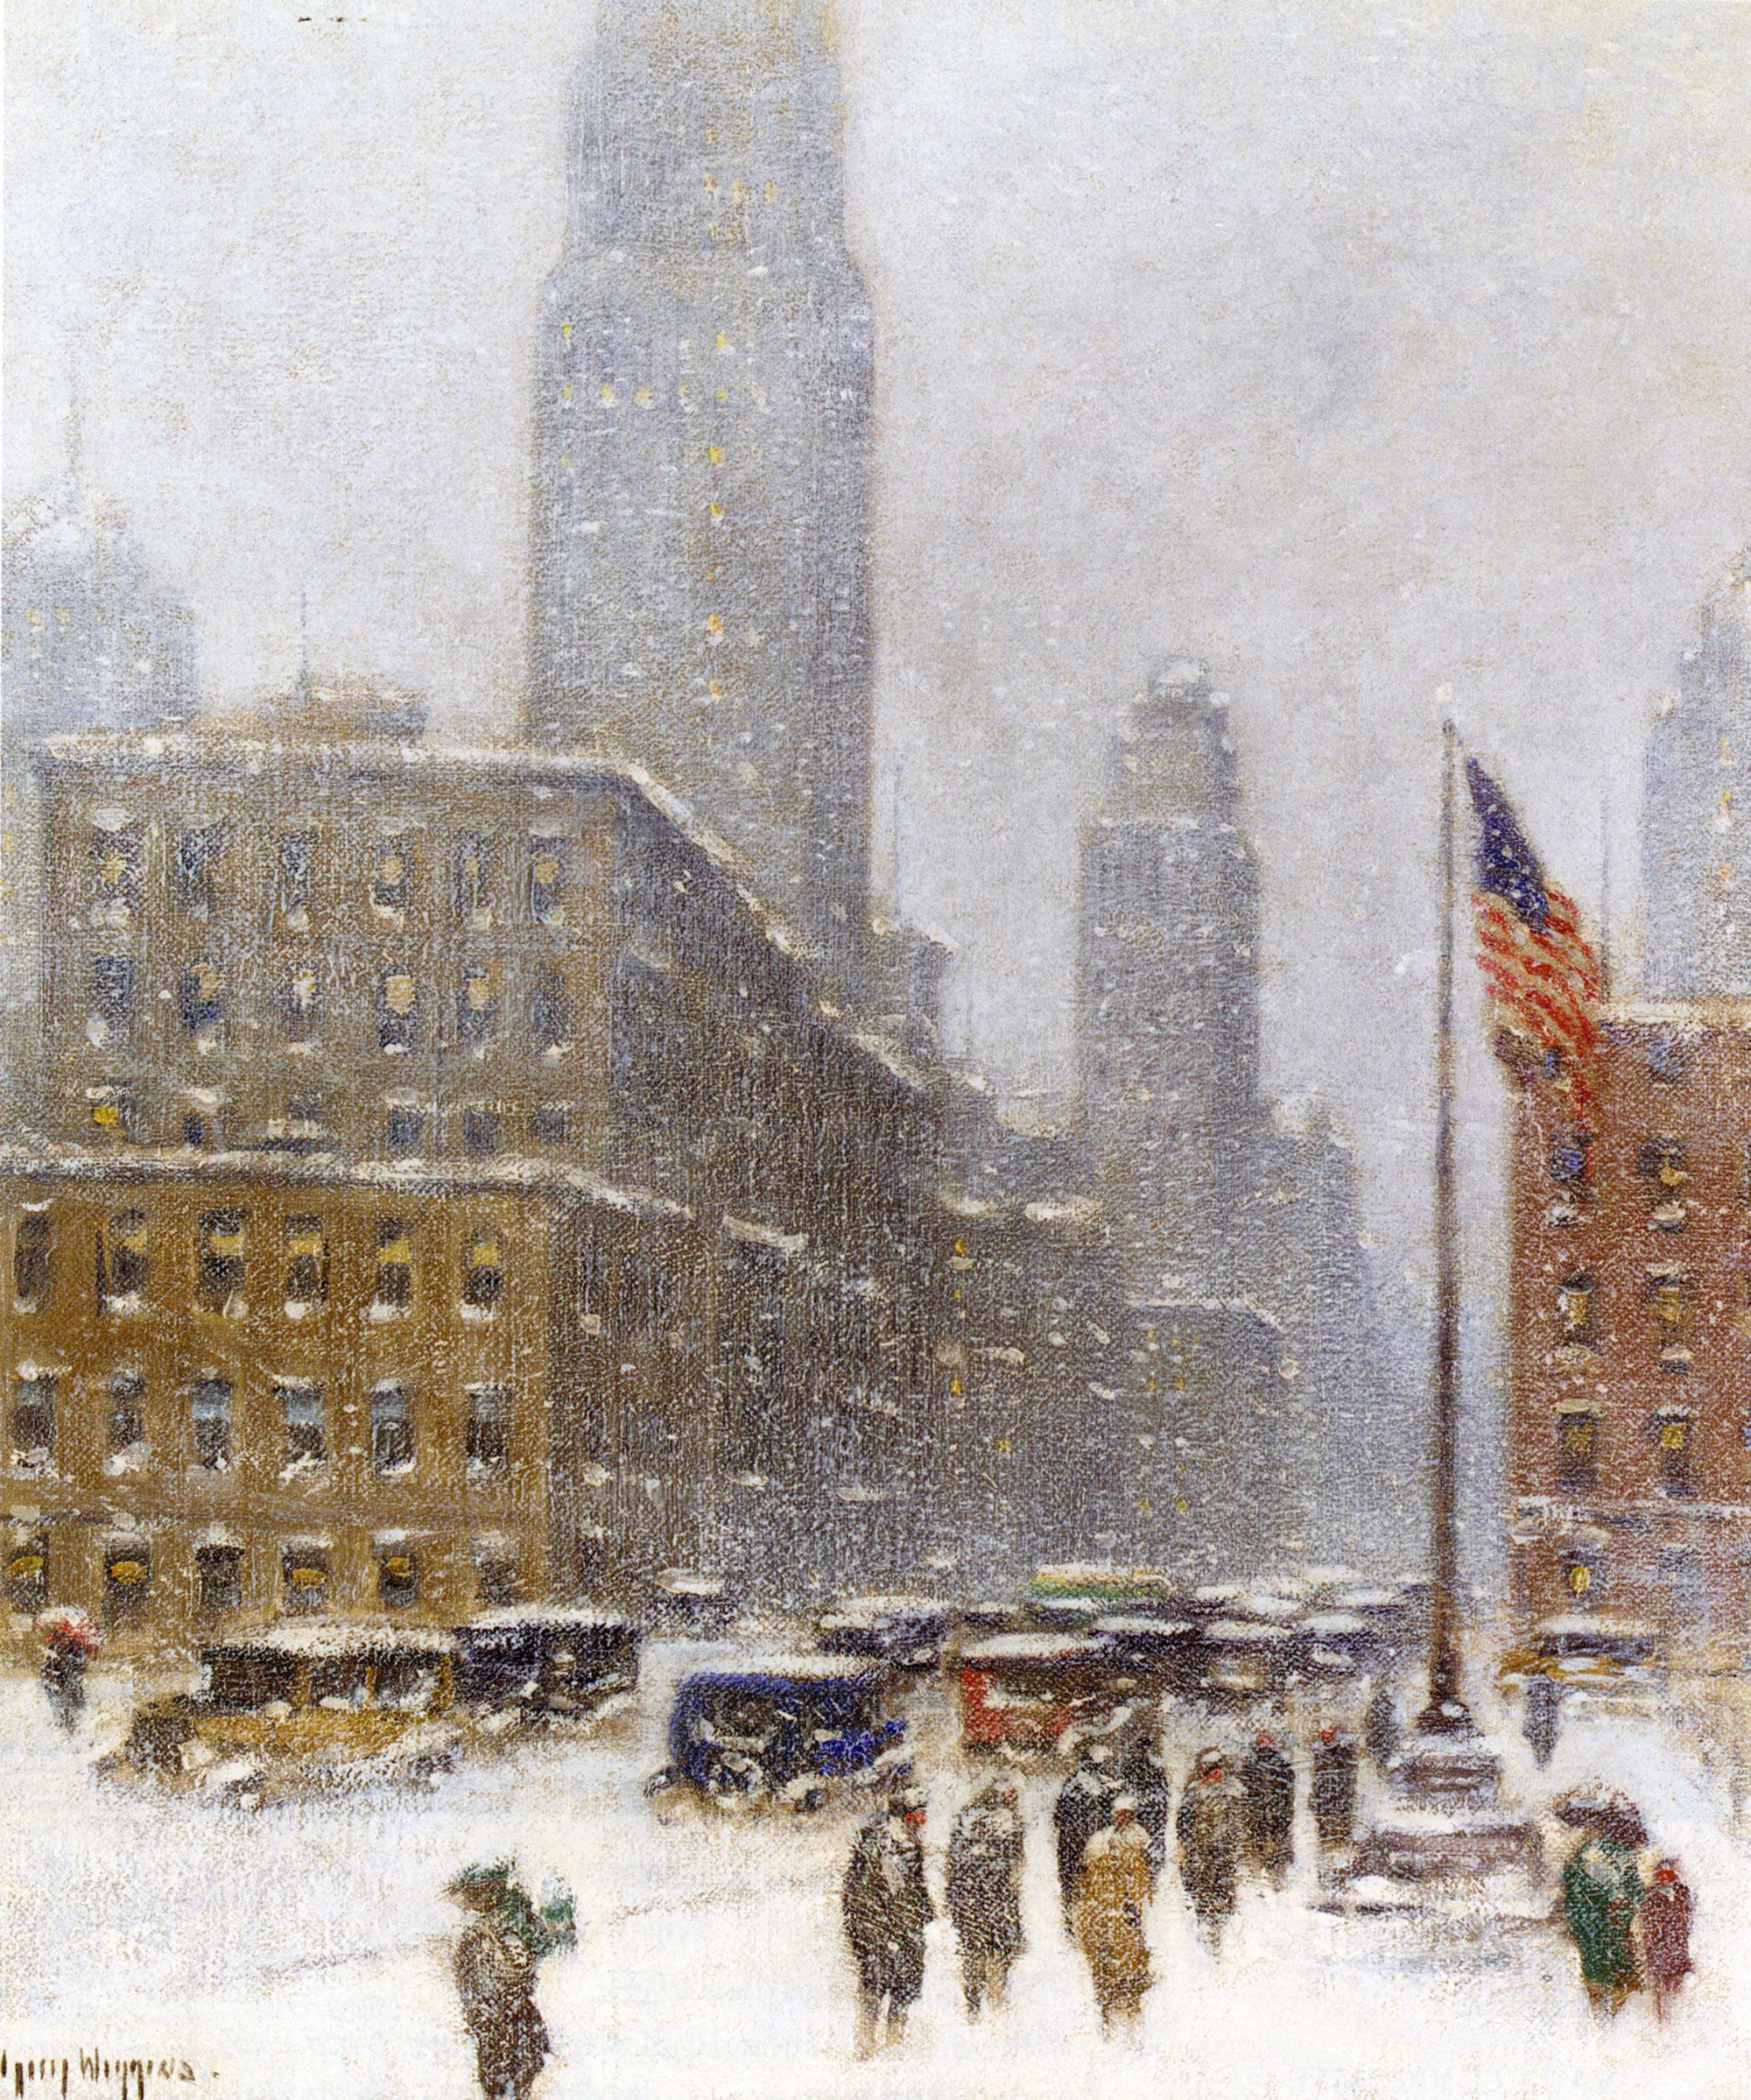 Empire State Building Winter by Guy Carleton Wiggins